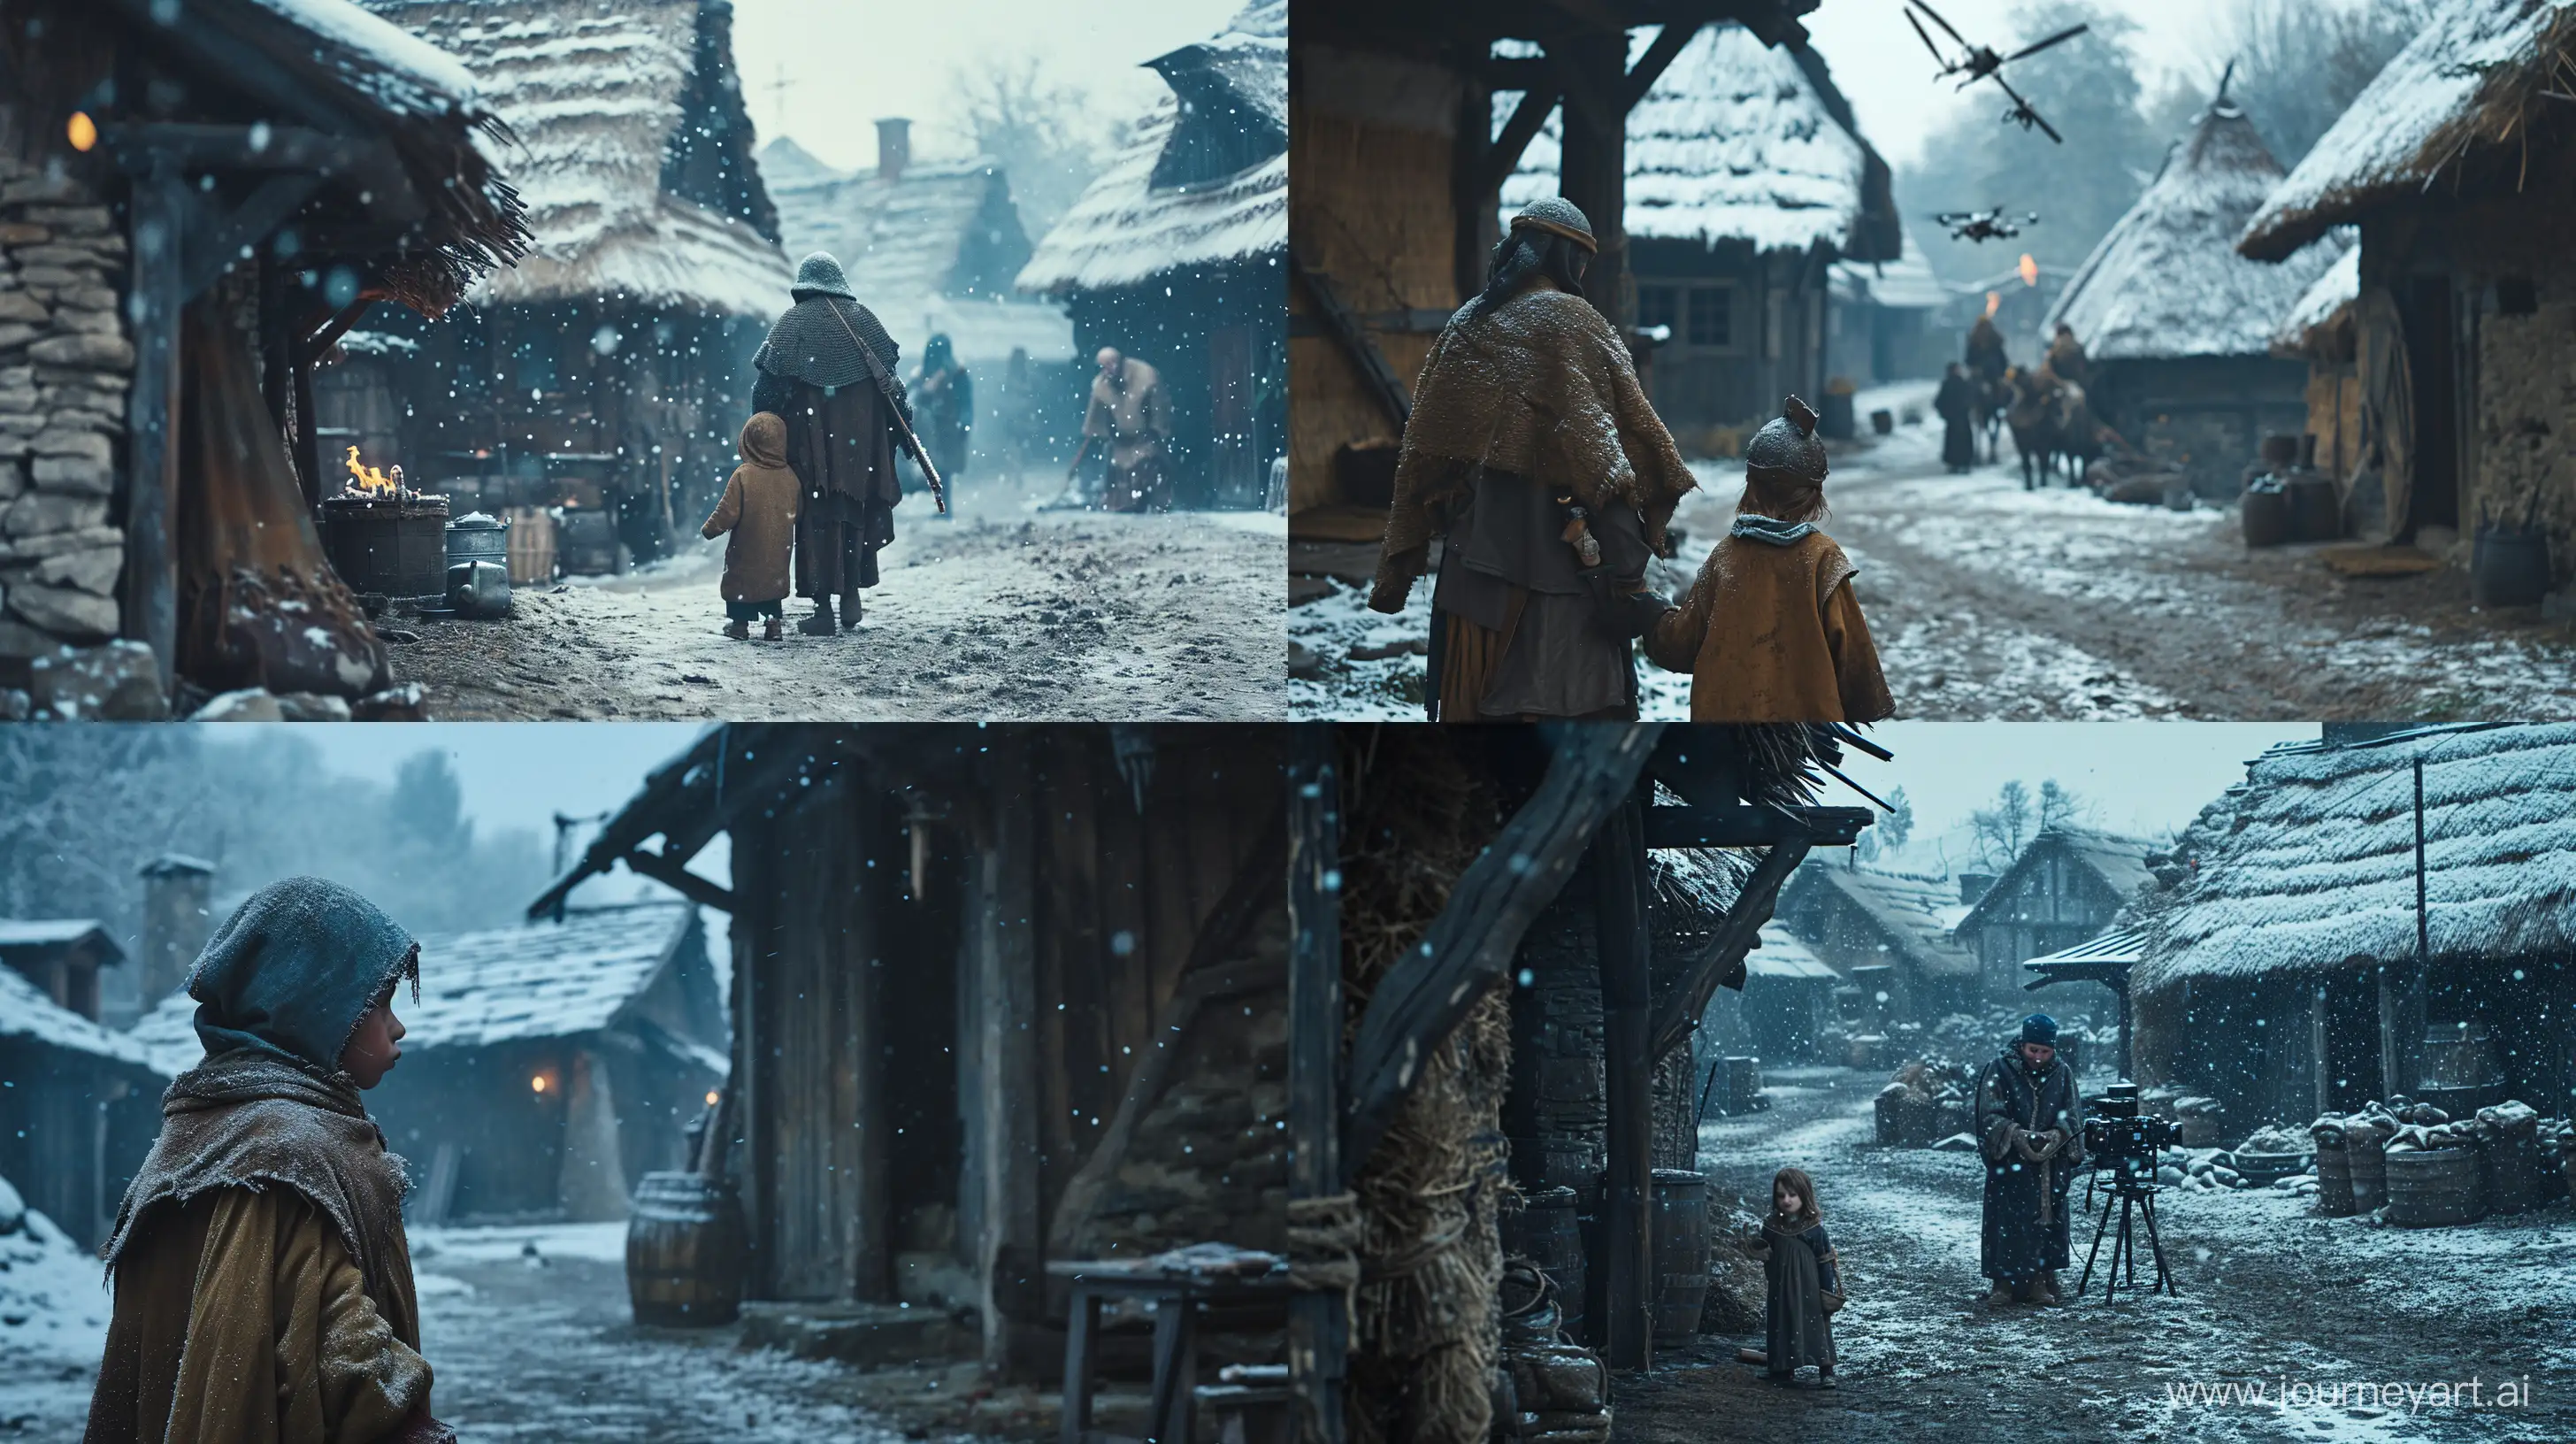 Medieval-Farmer-and-Child-in-Cinematic-Snowy-Village